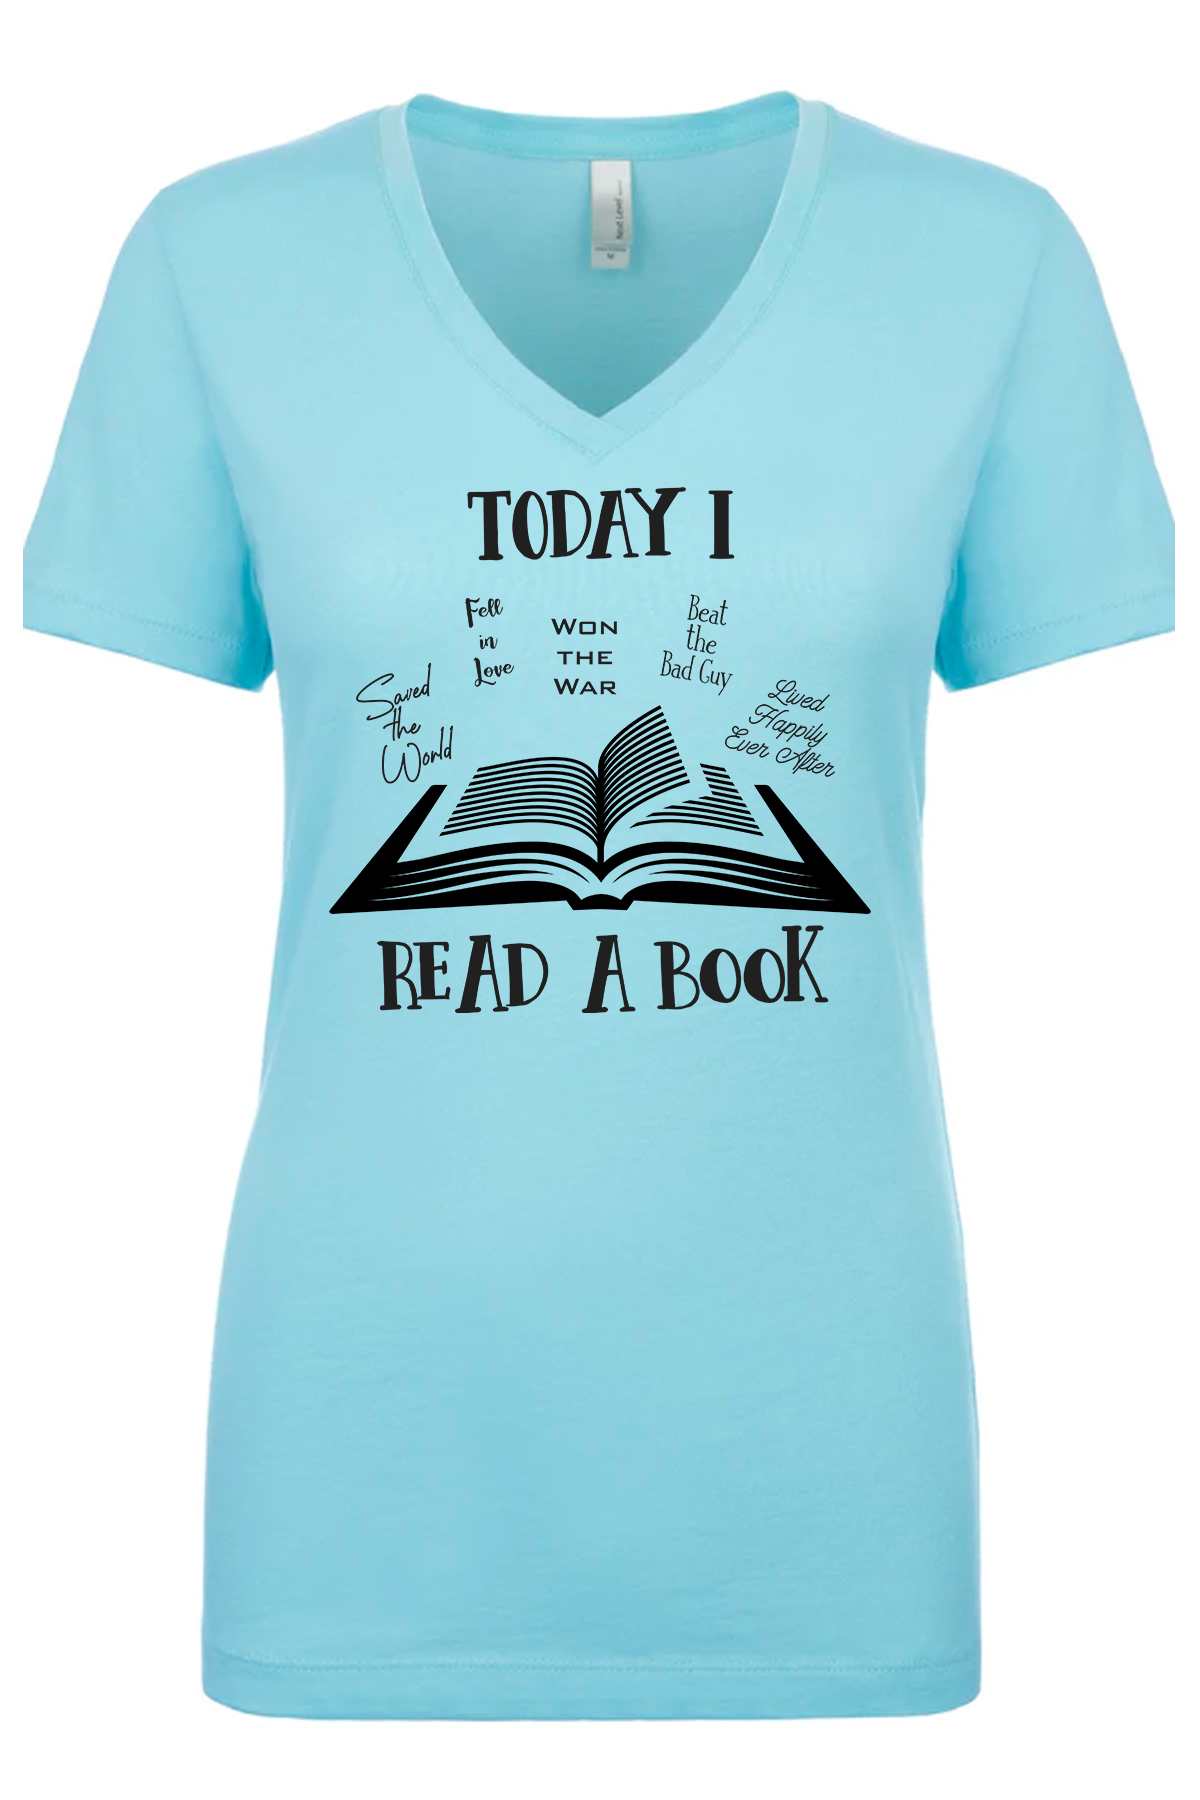 “Today I…Read a Book” T-Shirt | Roseanna M. White